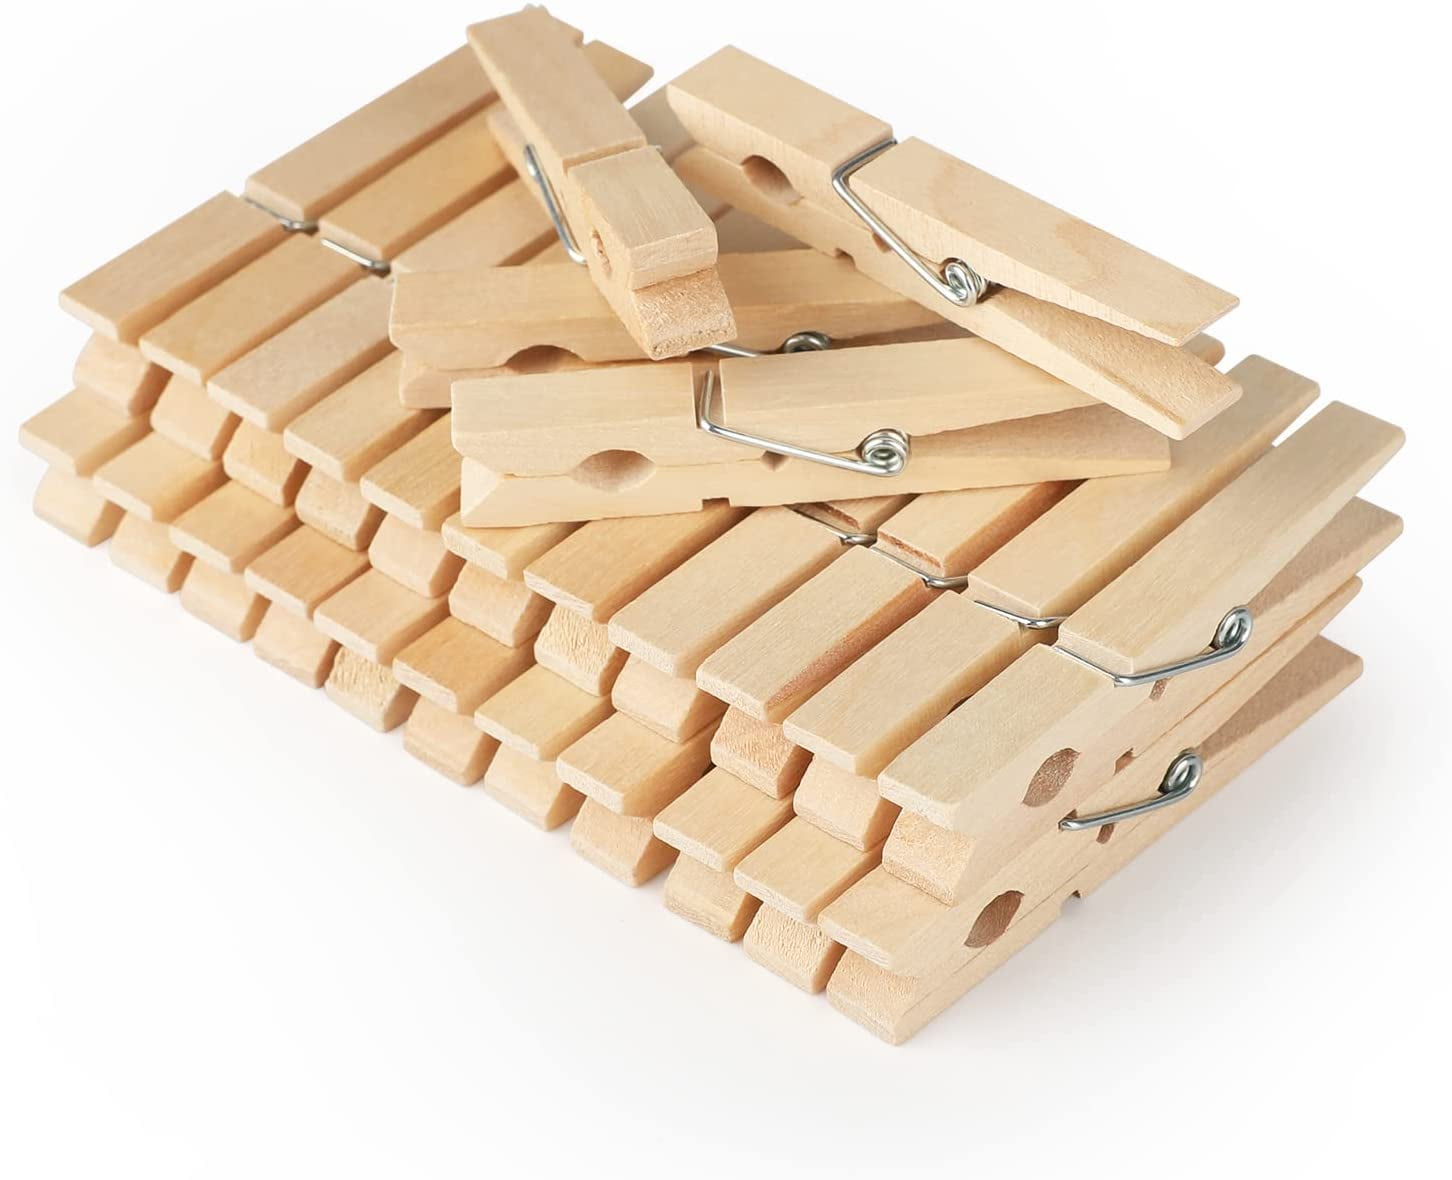 Wooden Clothes Pins, 100pcs Wood Color 7.2cm Small Wooden Chip Clips for  Bag Clips Clothespin Bag Clothes Pin Heavy Duty Outdoor 